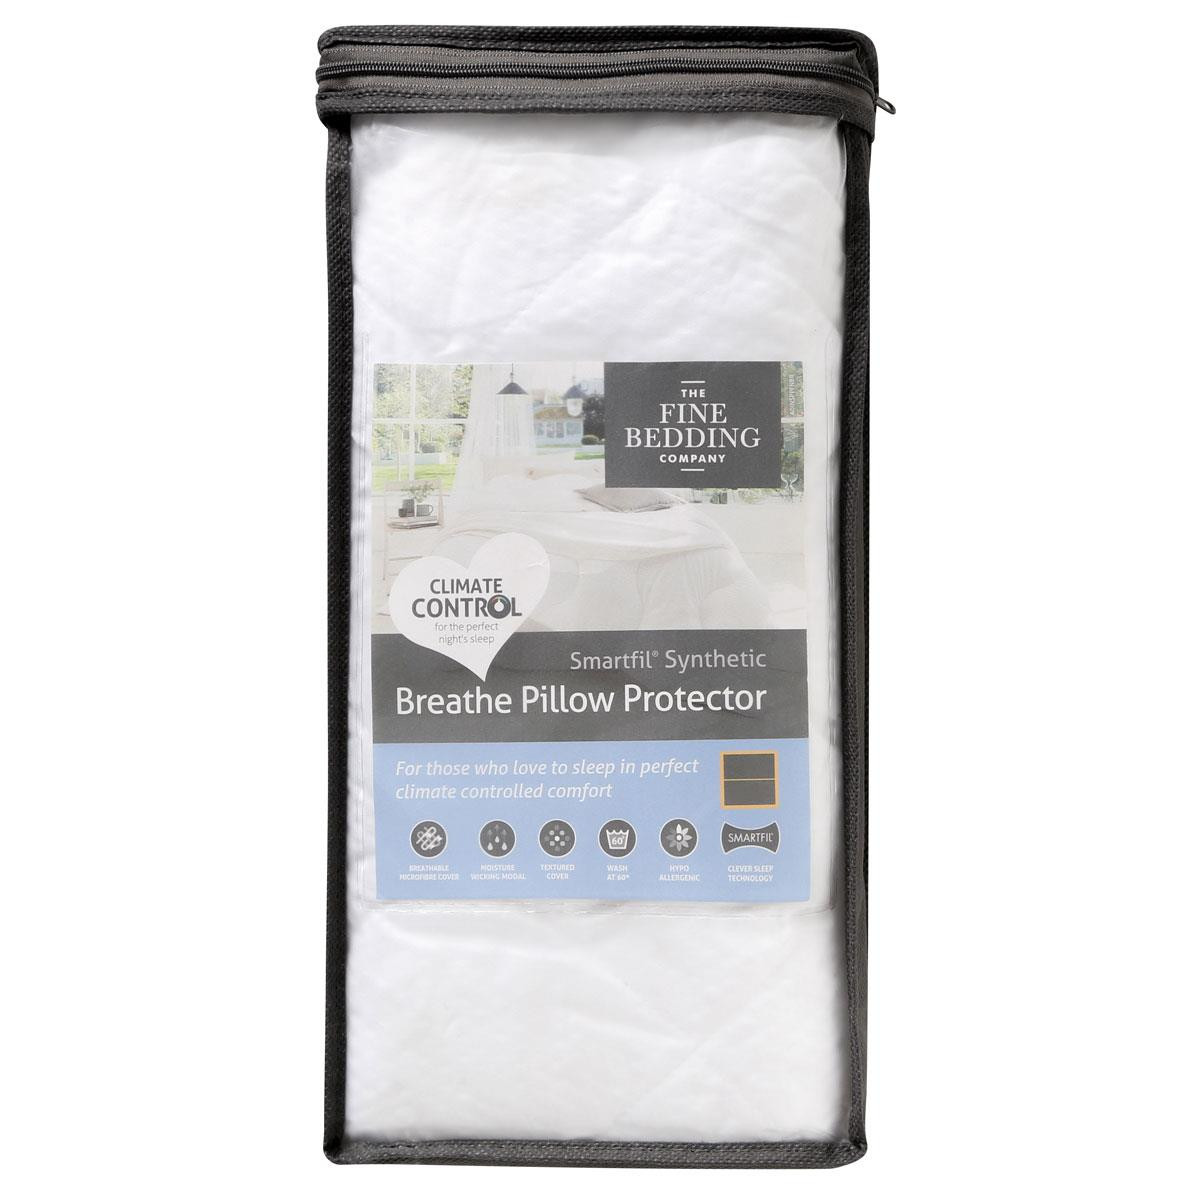 Image of The Fine Bedding Company Breathe Pillow Protector